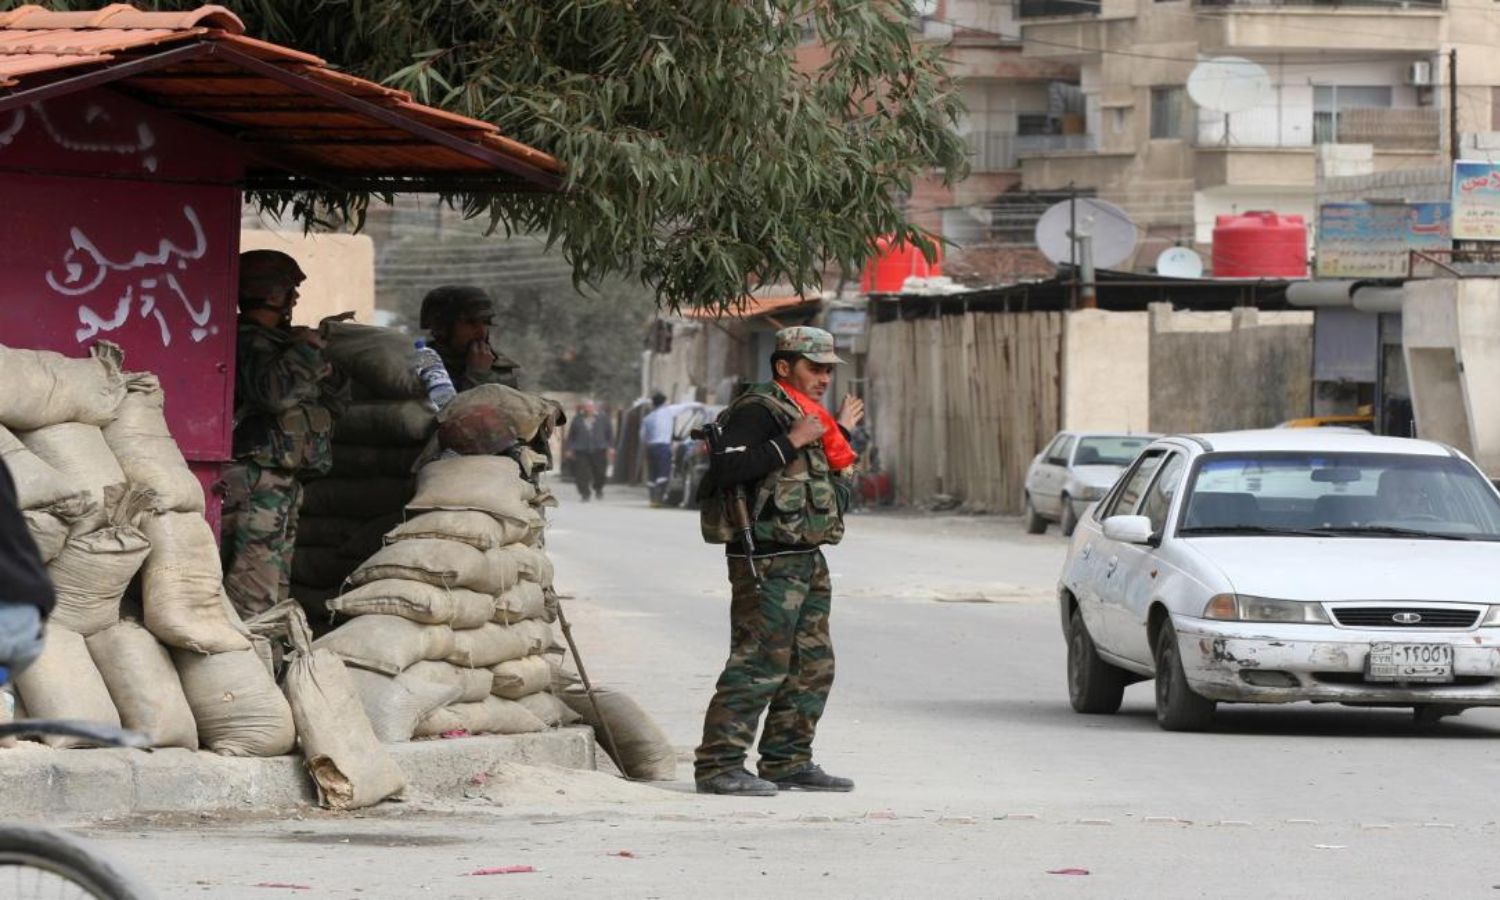 A regime army checkpoint in the central city of Homs (AFP/Loay Bishara)